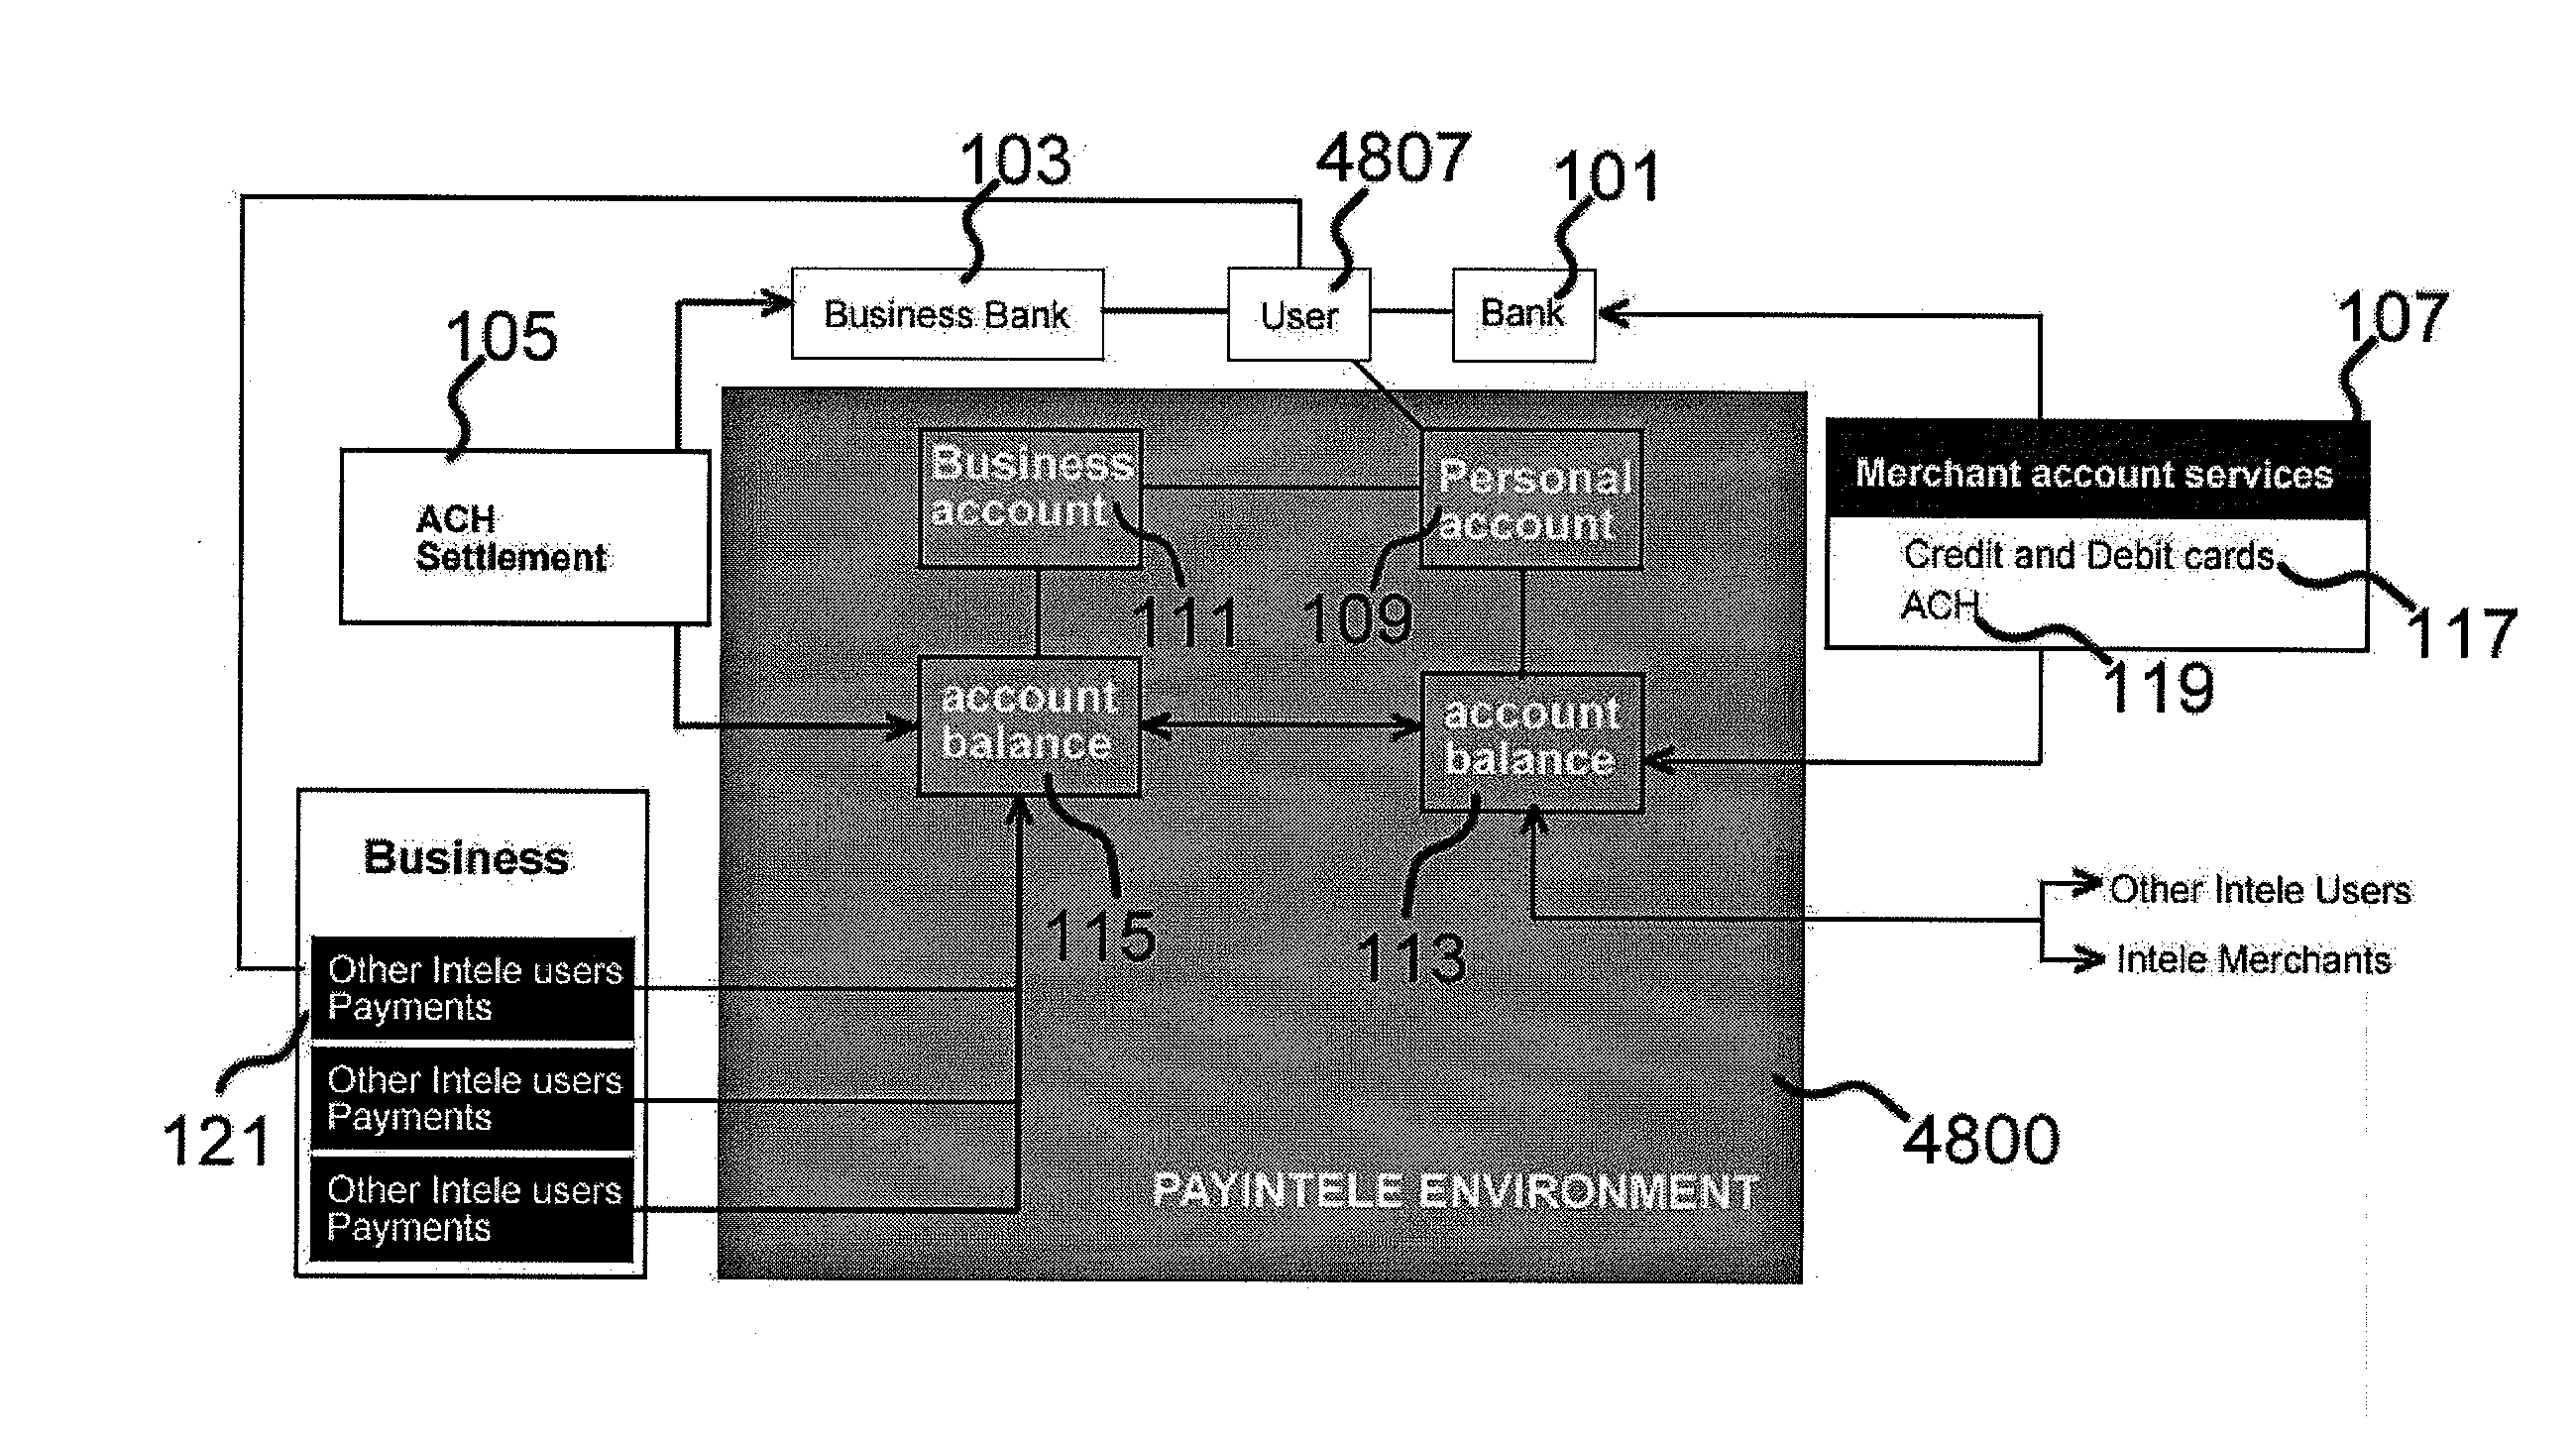 Method of virtual transaction using mobile electronic devices or fixed electronic devices or a combination of both, for global commercial or noncommercial purposes